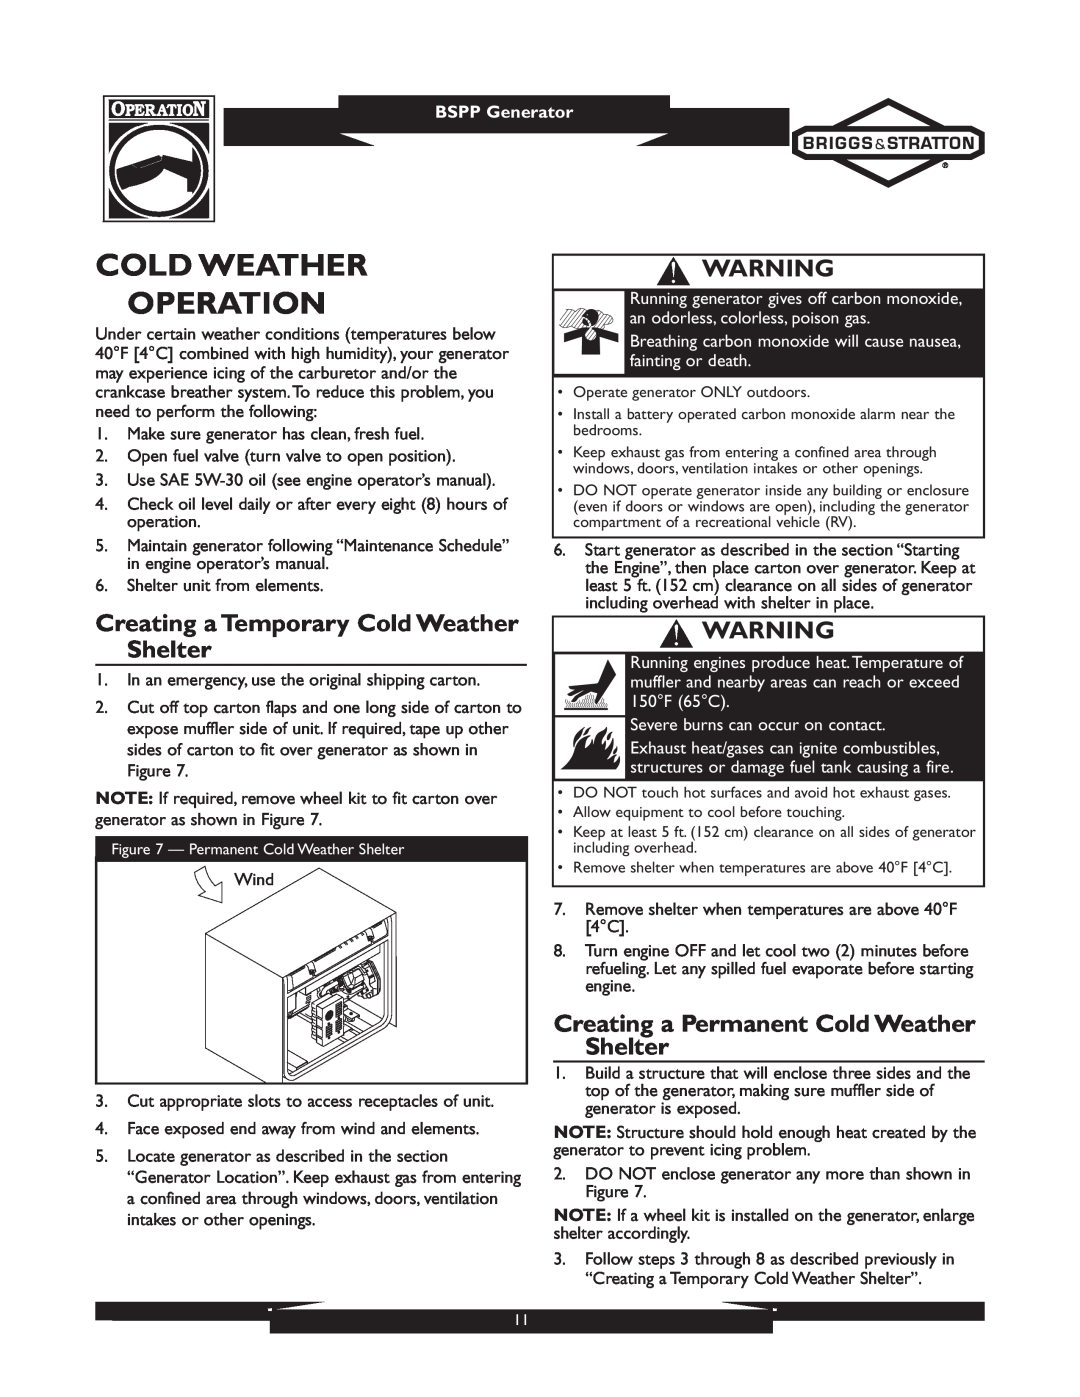 Briggs & Stratton 01933-1 Cold Weather Operation, Creating a Temporary Cold Weather Shelter, BSPP Generator 